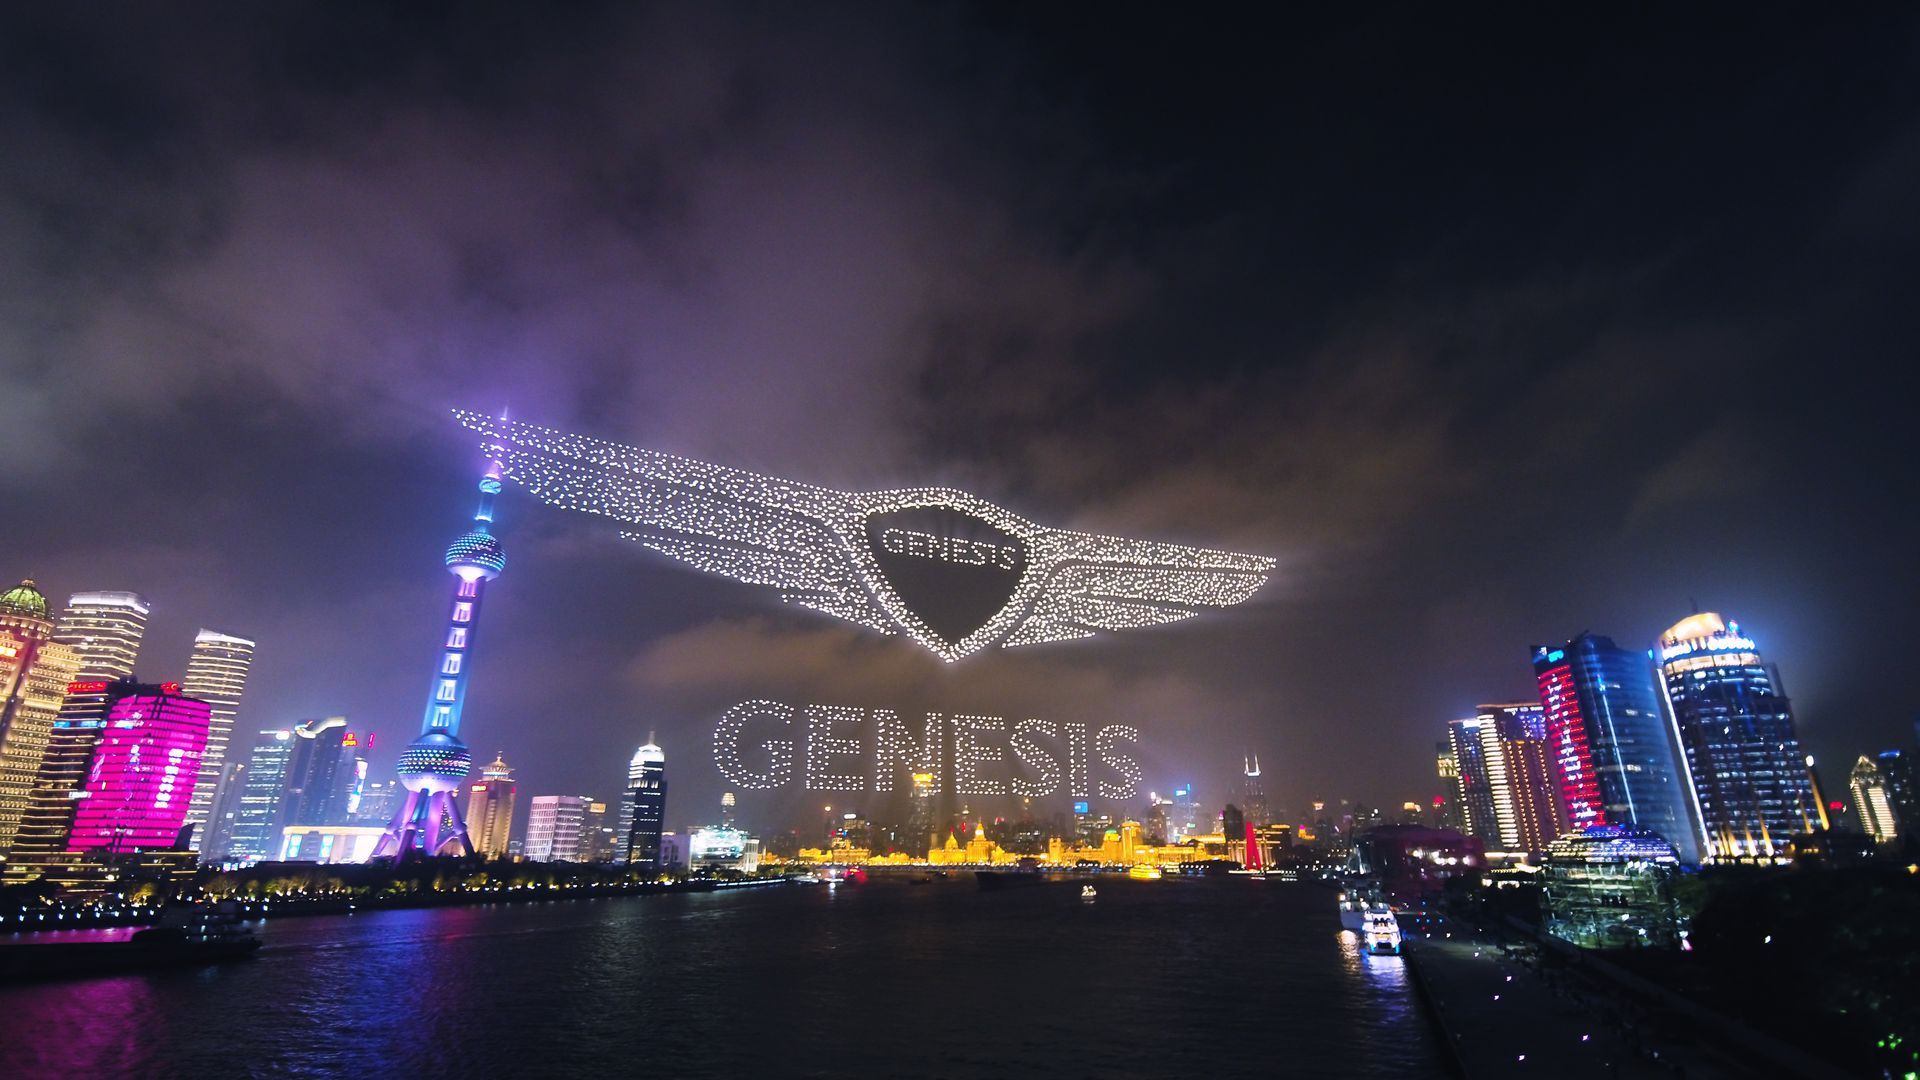 Drone light show promoting Genesis luxury car brand's arrival in Shanghai.